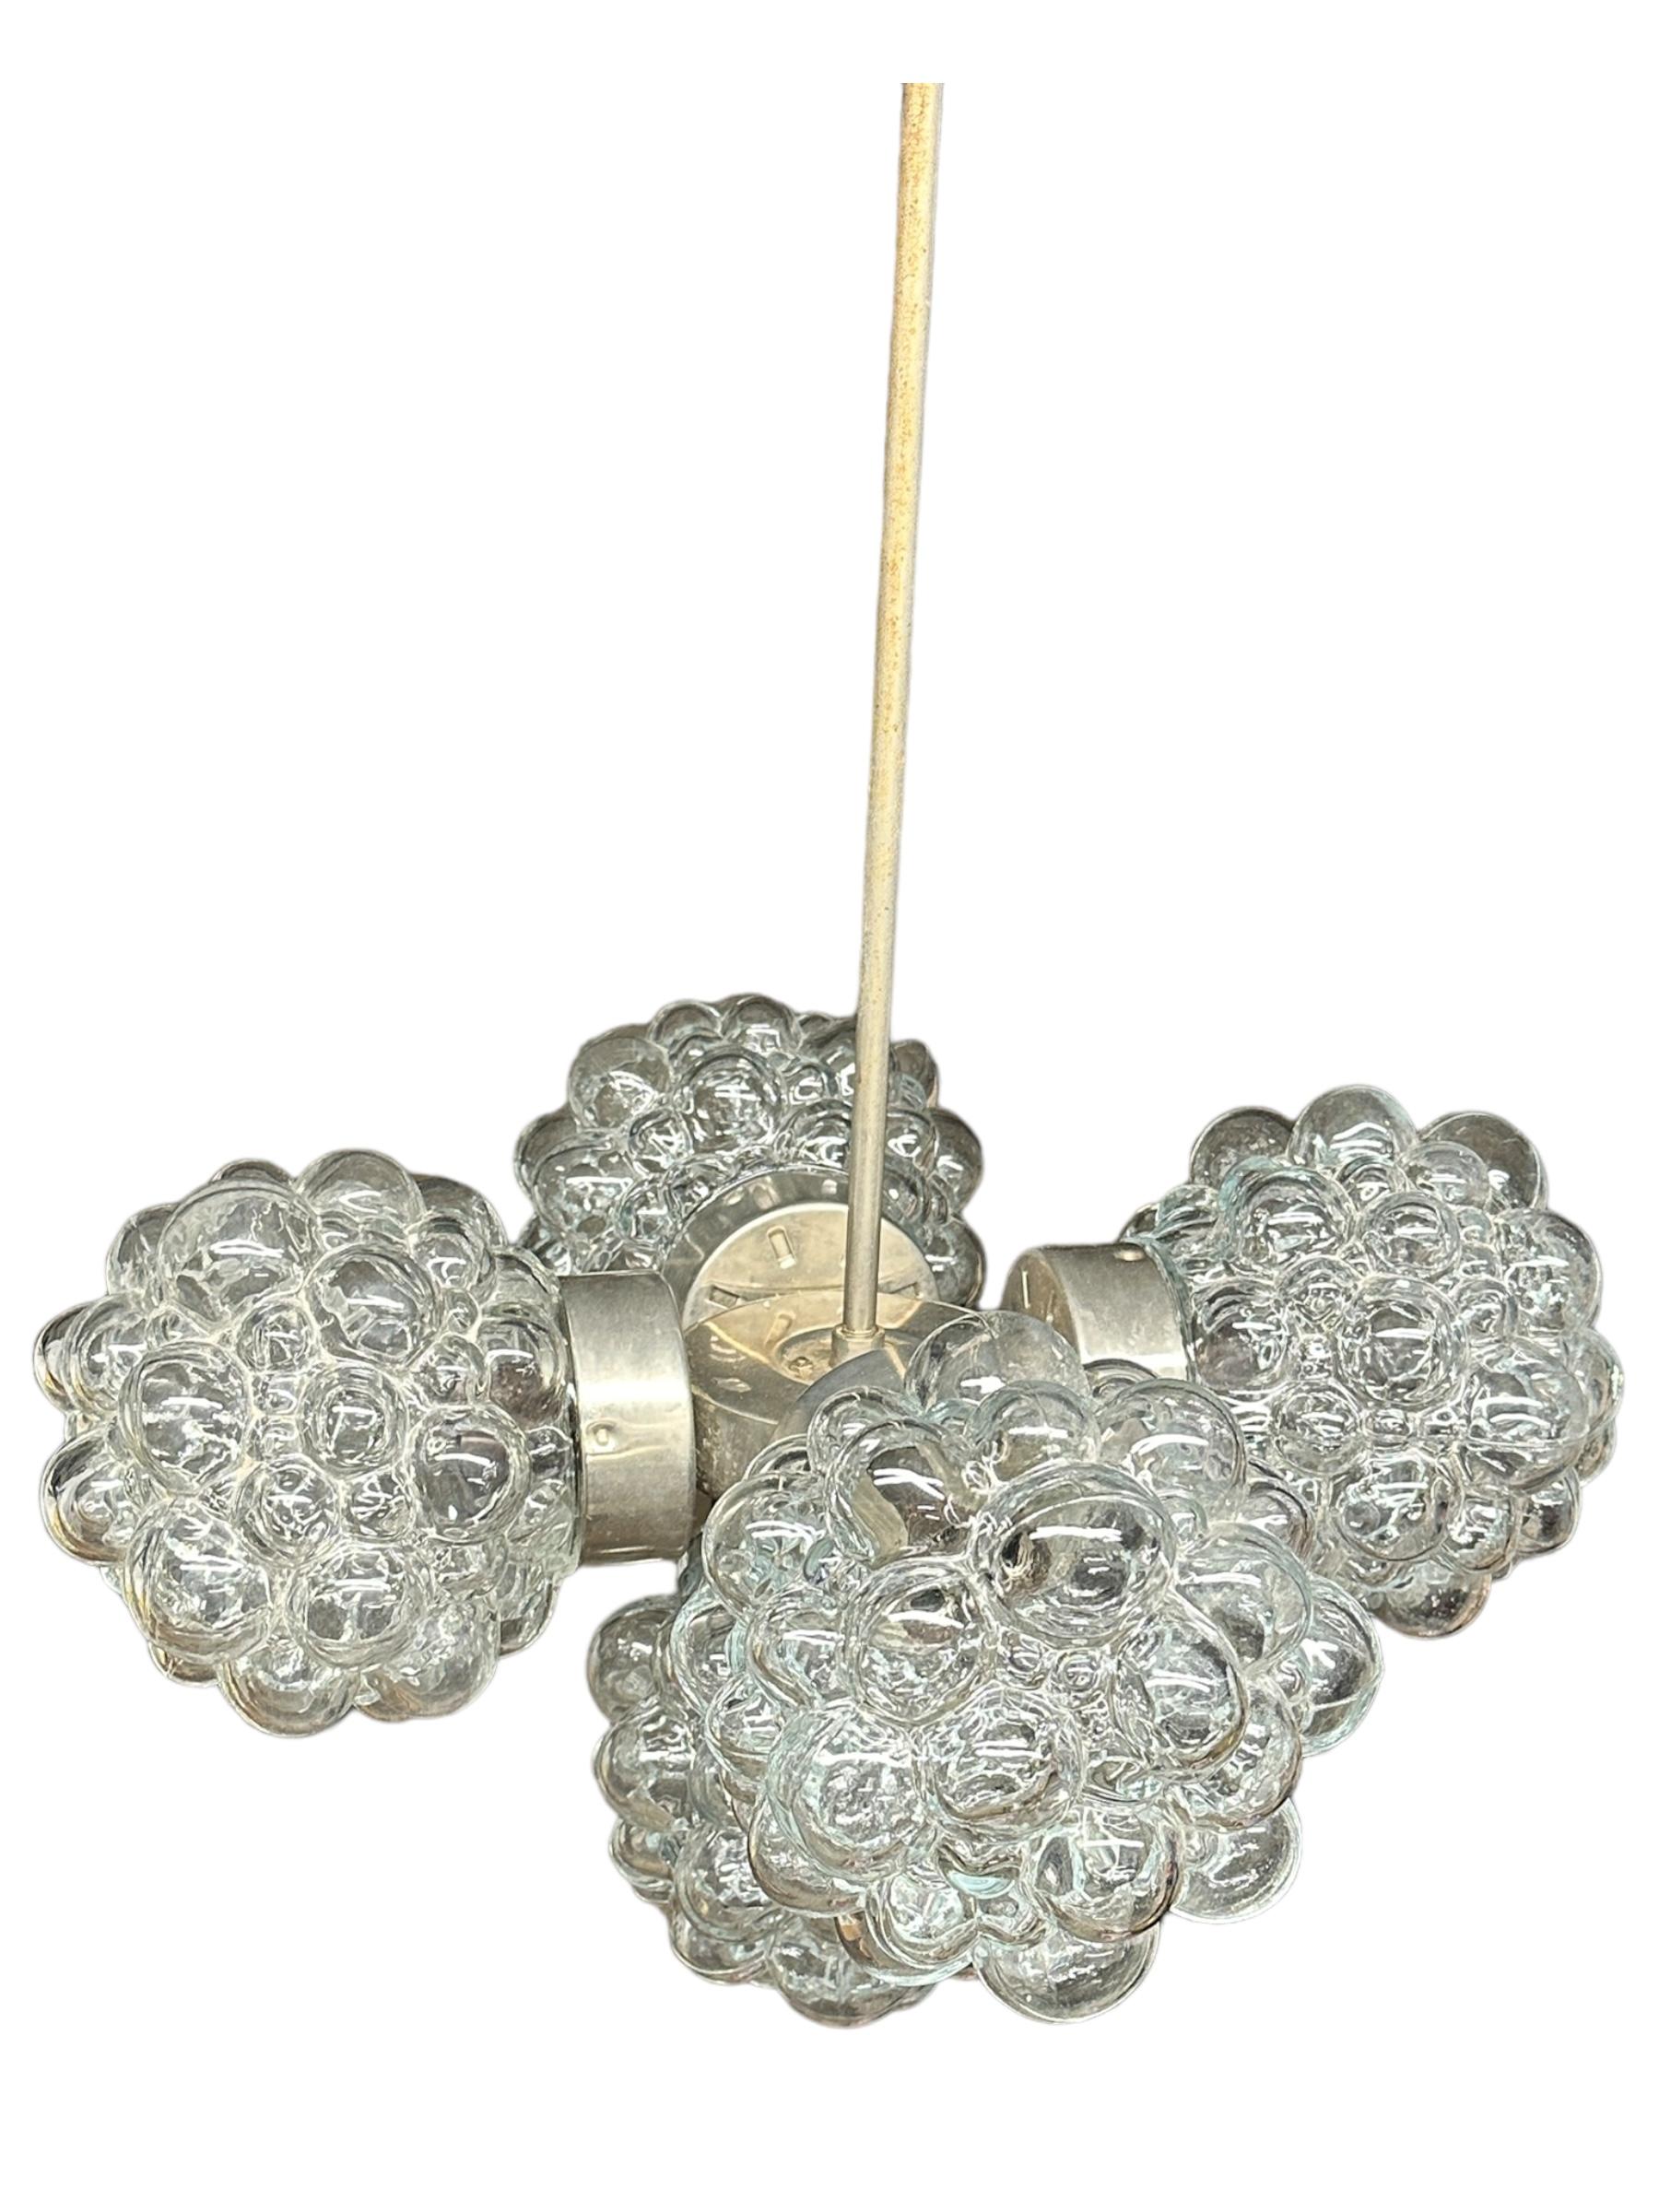 5 Light Bubble Glass Helena Tynell Style Chandelier, Austria 1960s In Good Condition For Sale In Nuernberg, DE